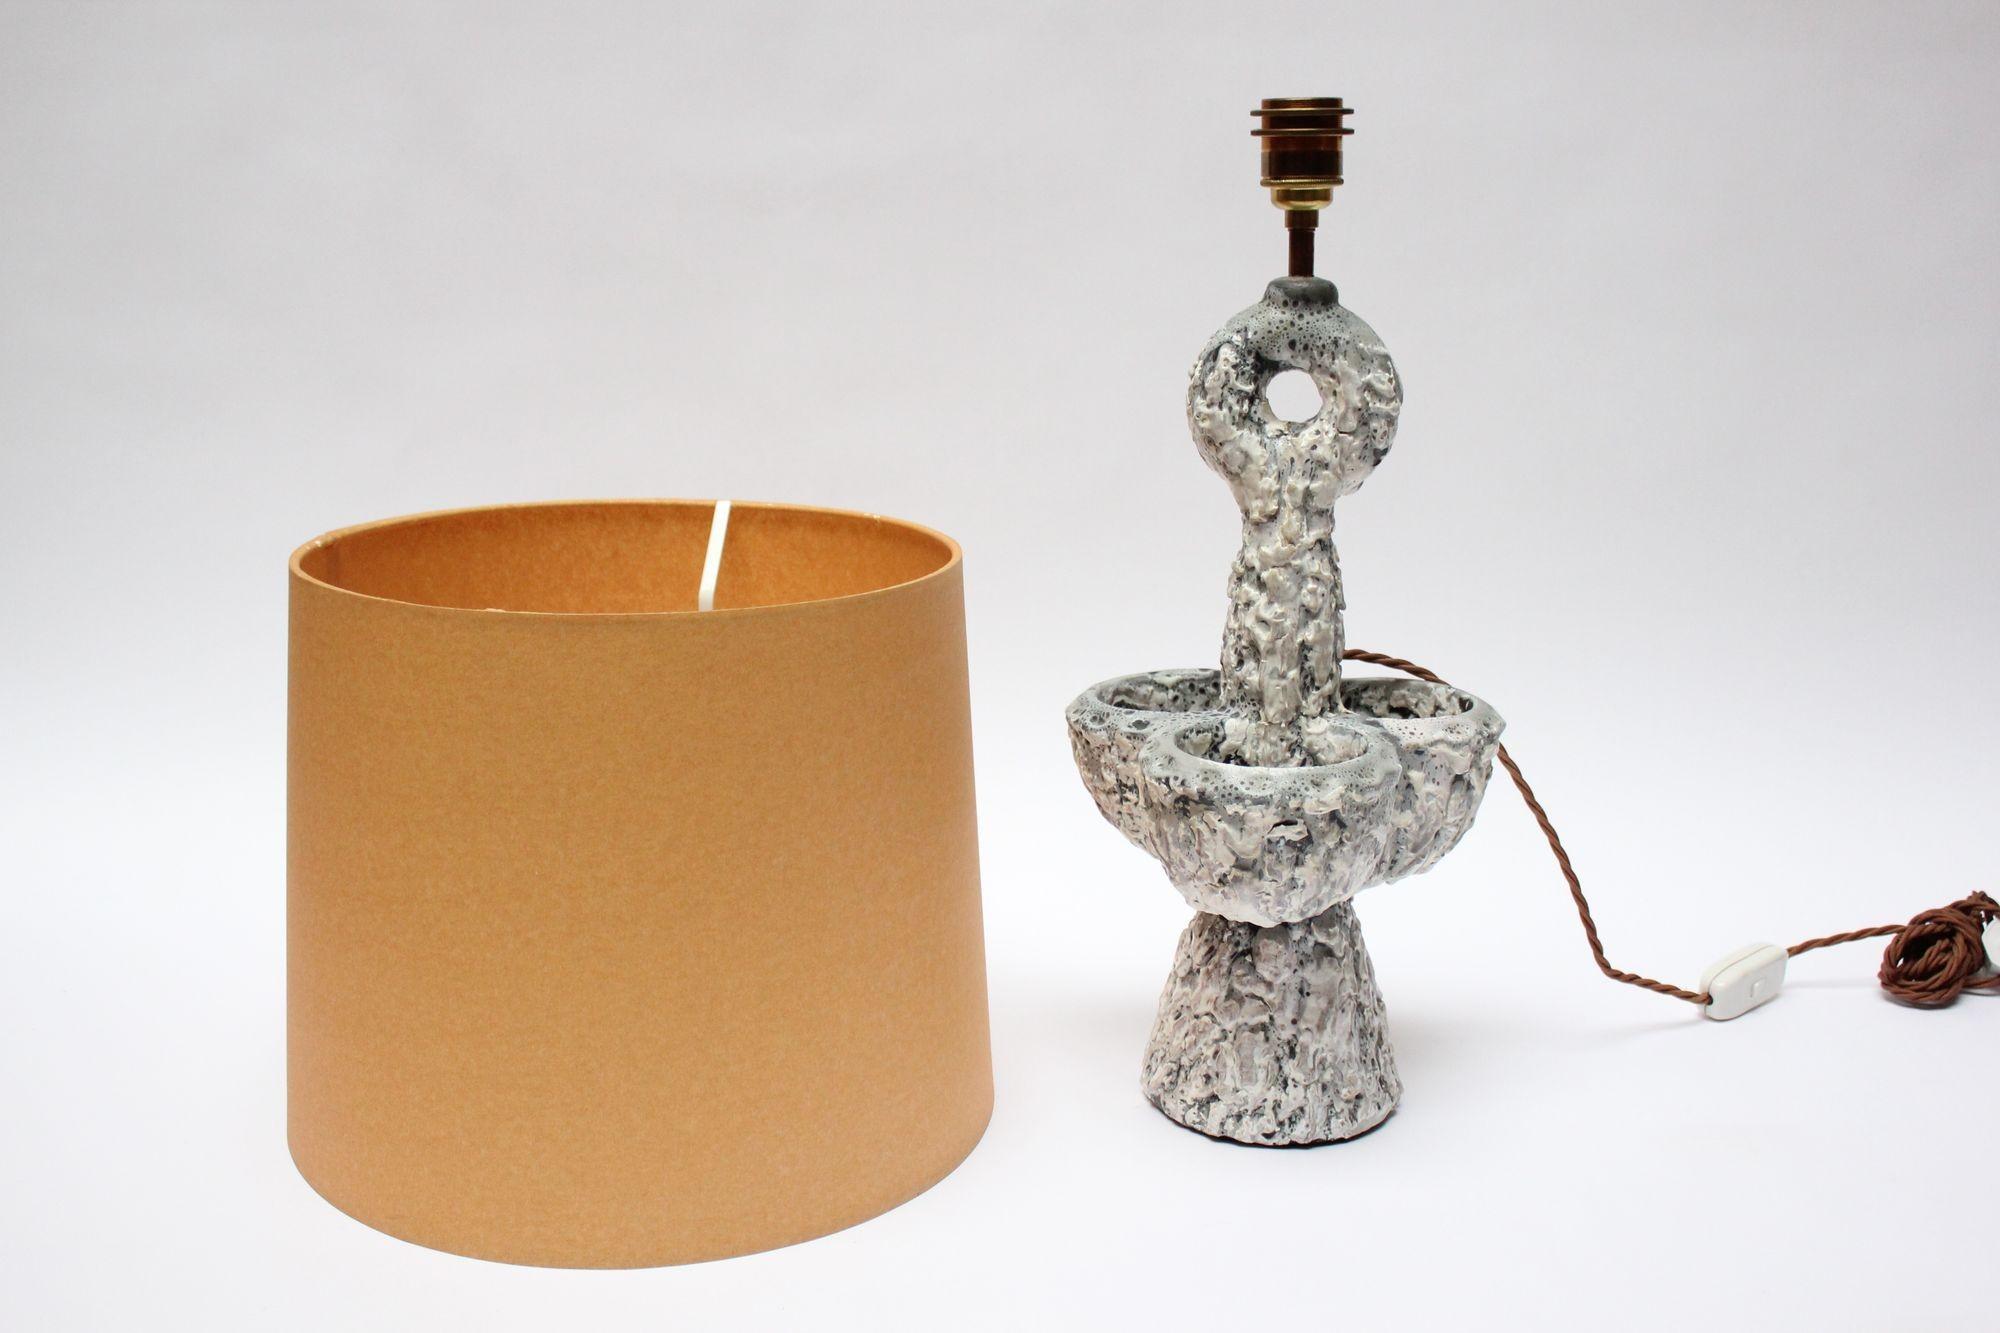 Ceramic table lamp produced by Louis Giraud for his eponymous studio, 'Poterie d'Art Giraud' (Vallauris, France, ca. early 1950s). Giraud's sculptural works were often seen in thick lava glazes. 
This piece is a fine example showcasing Giraud's